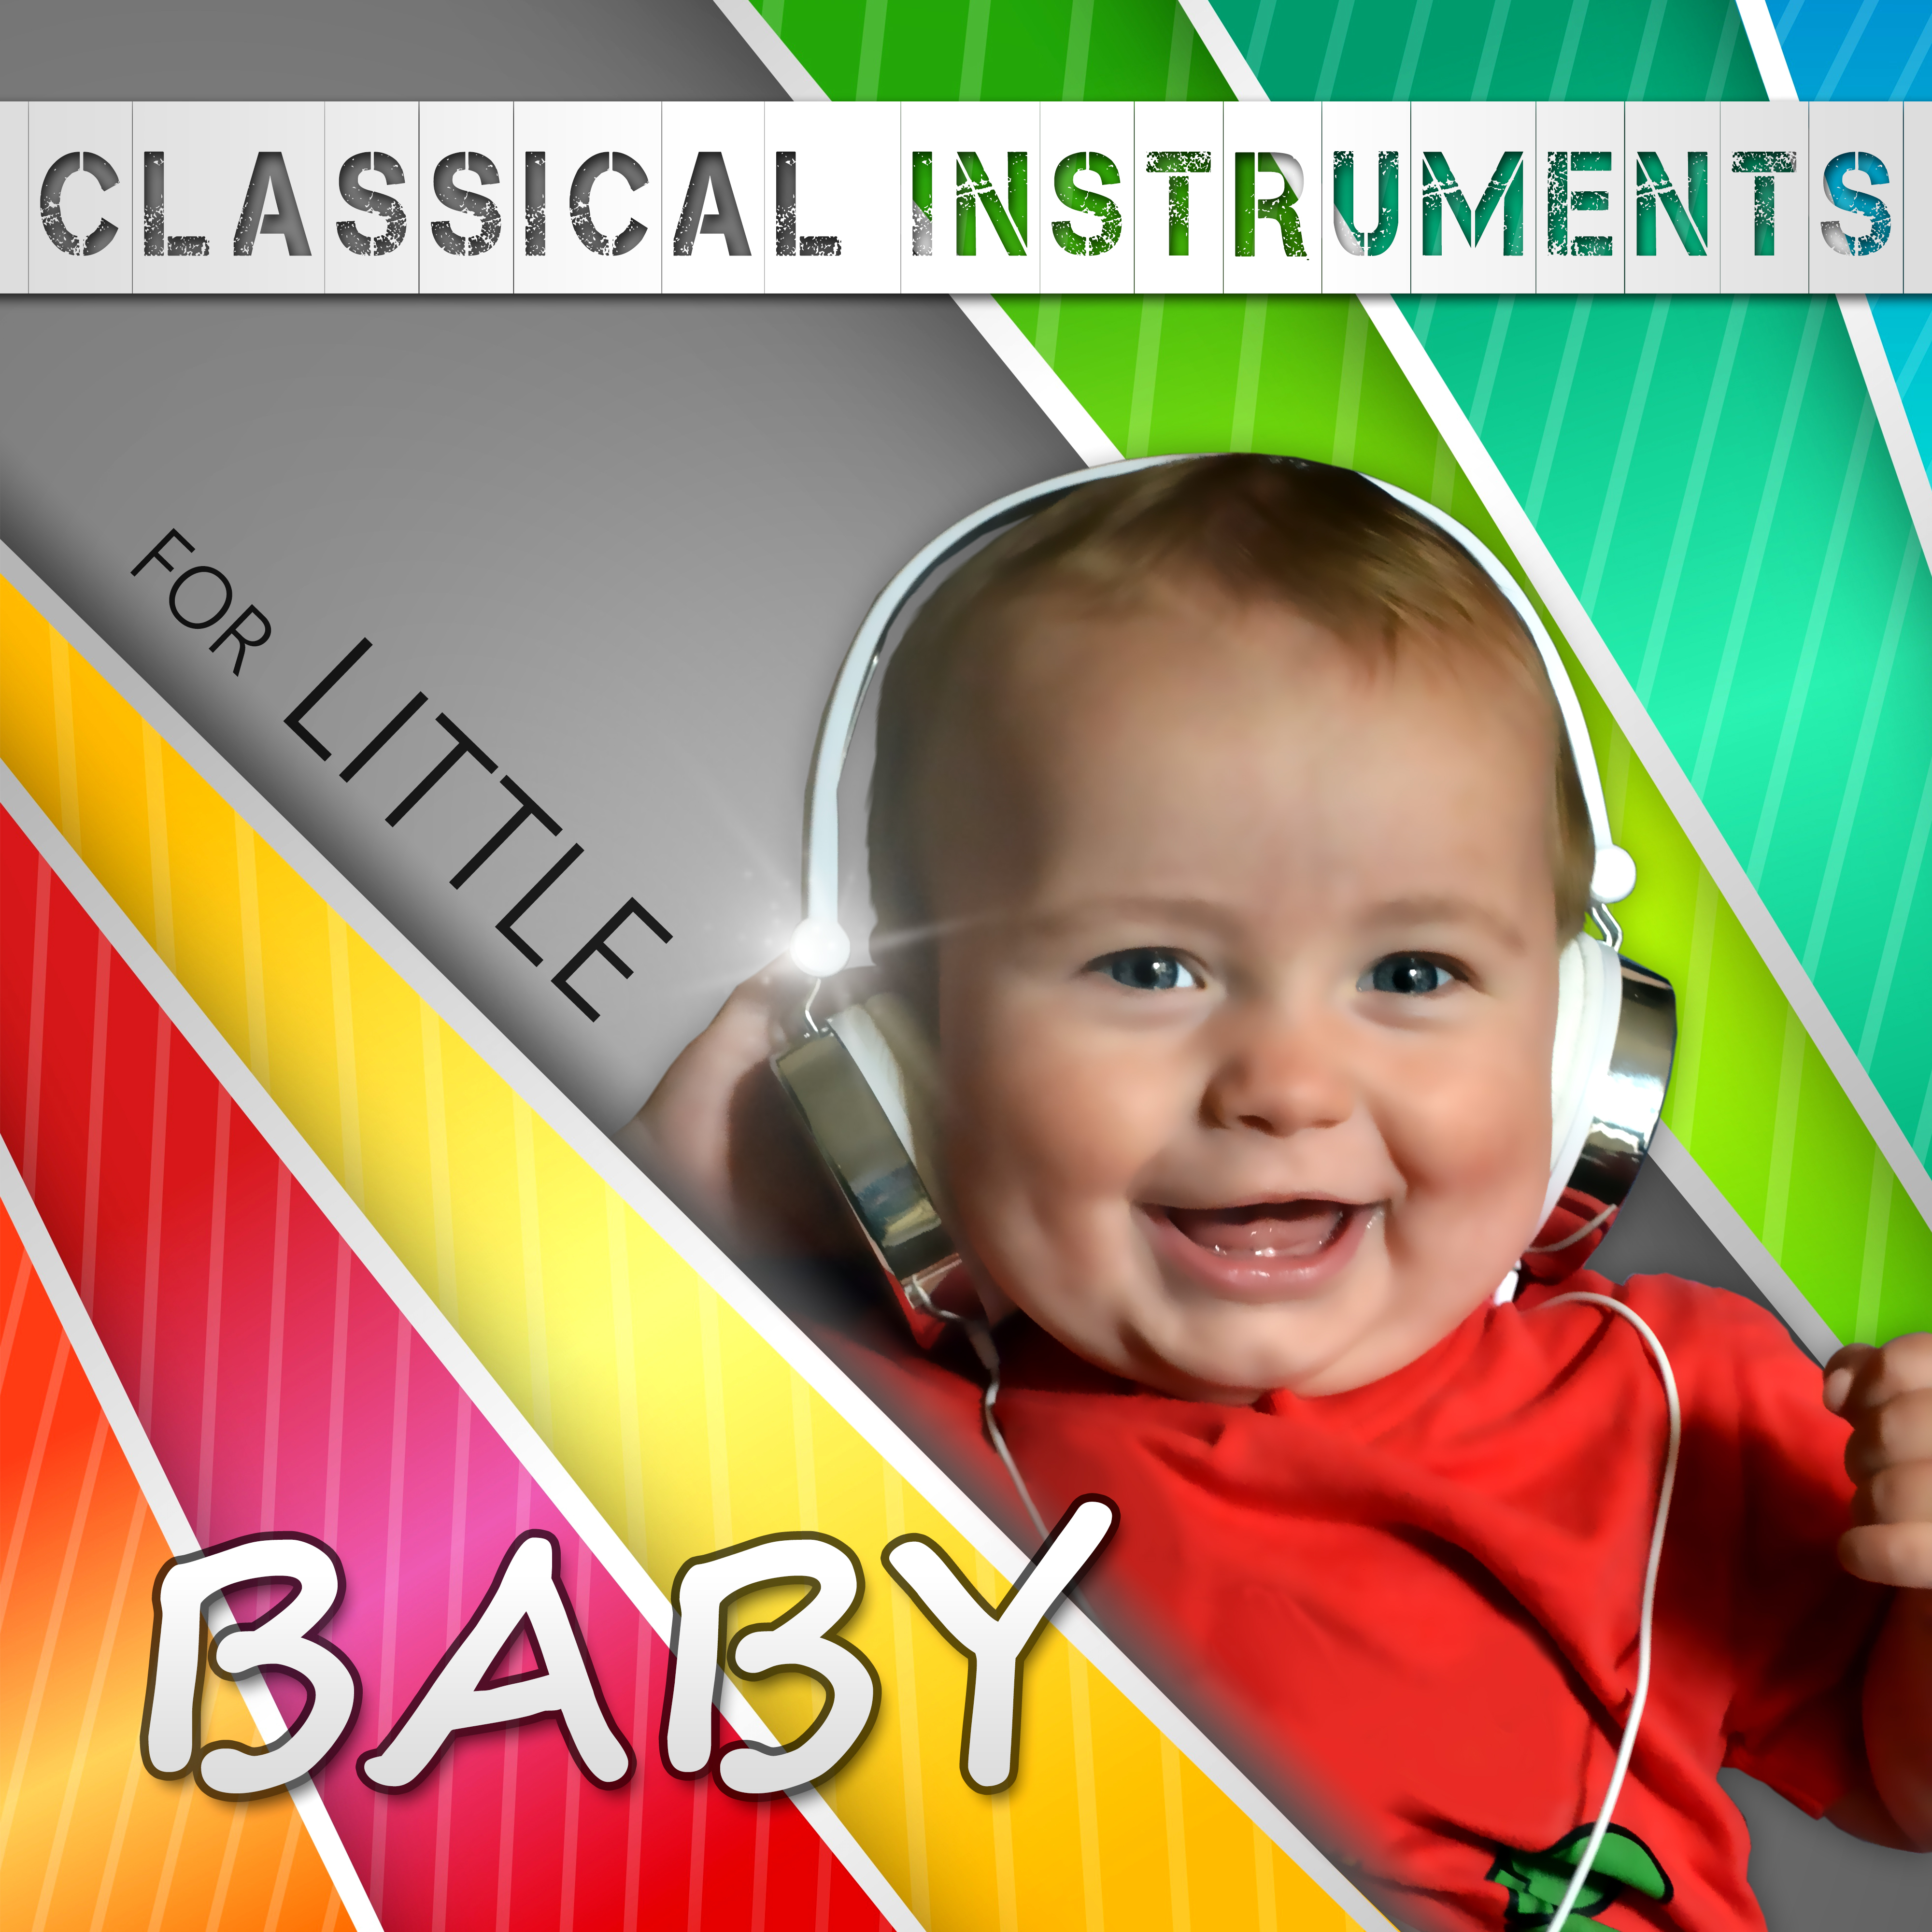 Classical Instruments for Little Baby -  Classical Piano, Dreamland Babies, Classical Music Songs, Bach, Mozart